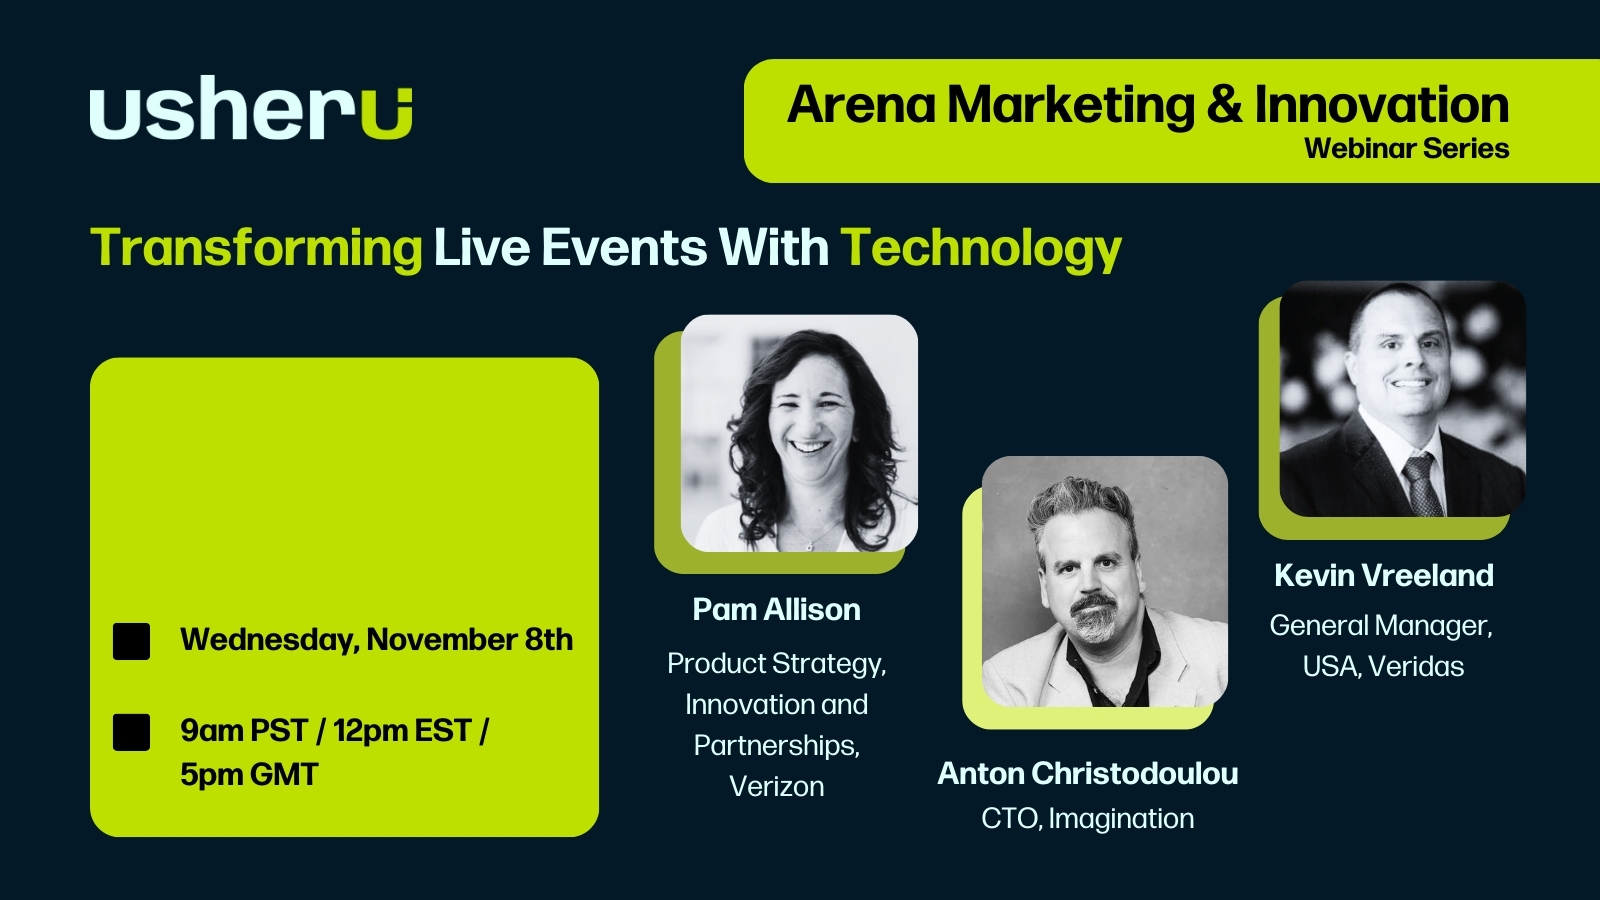 Usheru logo with green text box to the right, saying "Arena Marketing & Innovation Webinar Series". Below it is the webinar title "Transforming Live Events With Technology". There are photos of the three event speakers and a description of who they are. The first is "Pam Allison, Product Strategy, Innovation and Partnerships, Verizon". Next is "Anton Christodoulou, CTO, Imagination". The final one is "Kevin Vreeland, General Manager, USA, Veridas". To the left is another green textbox with the date, "Wednesday, November 8th", and the time "9am PST / 12pm EST / 5pm GMT"